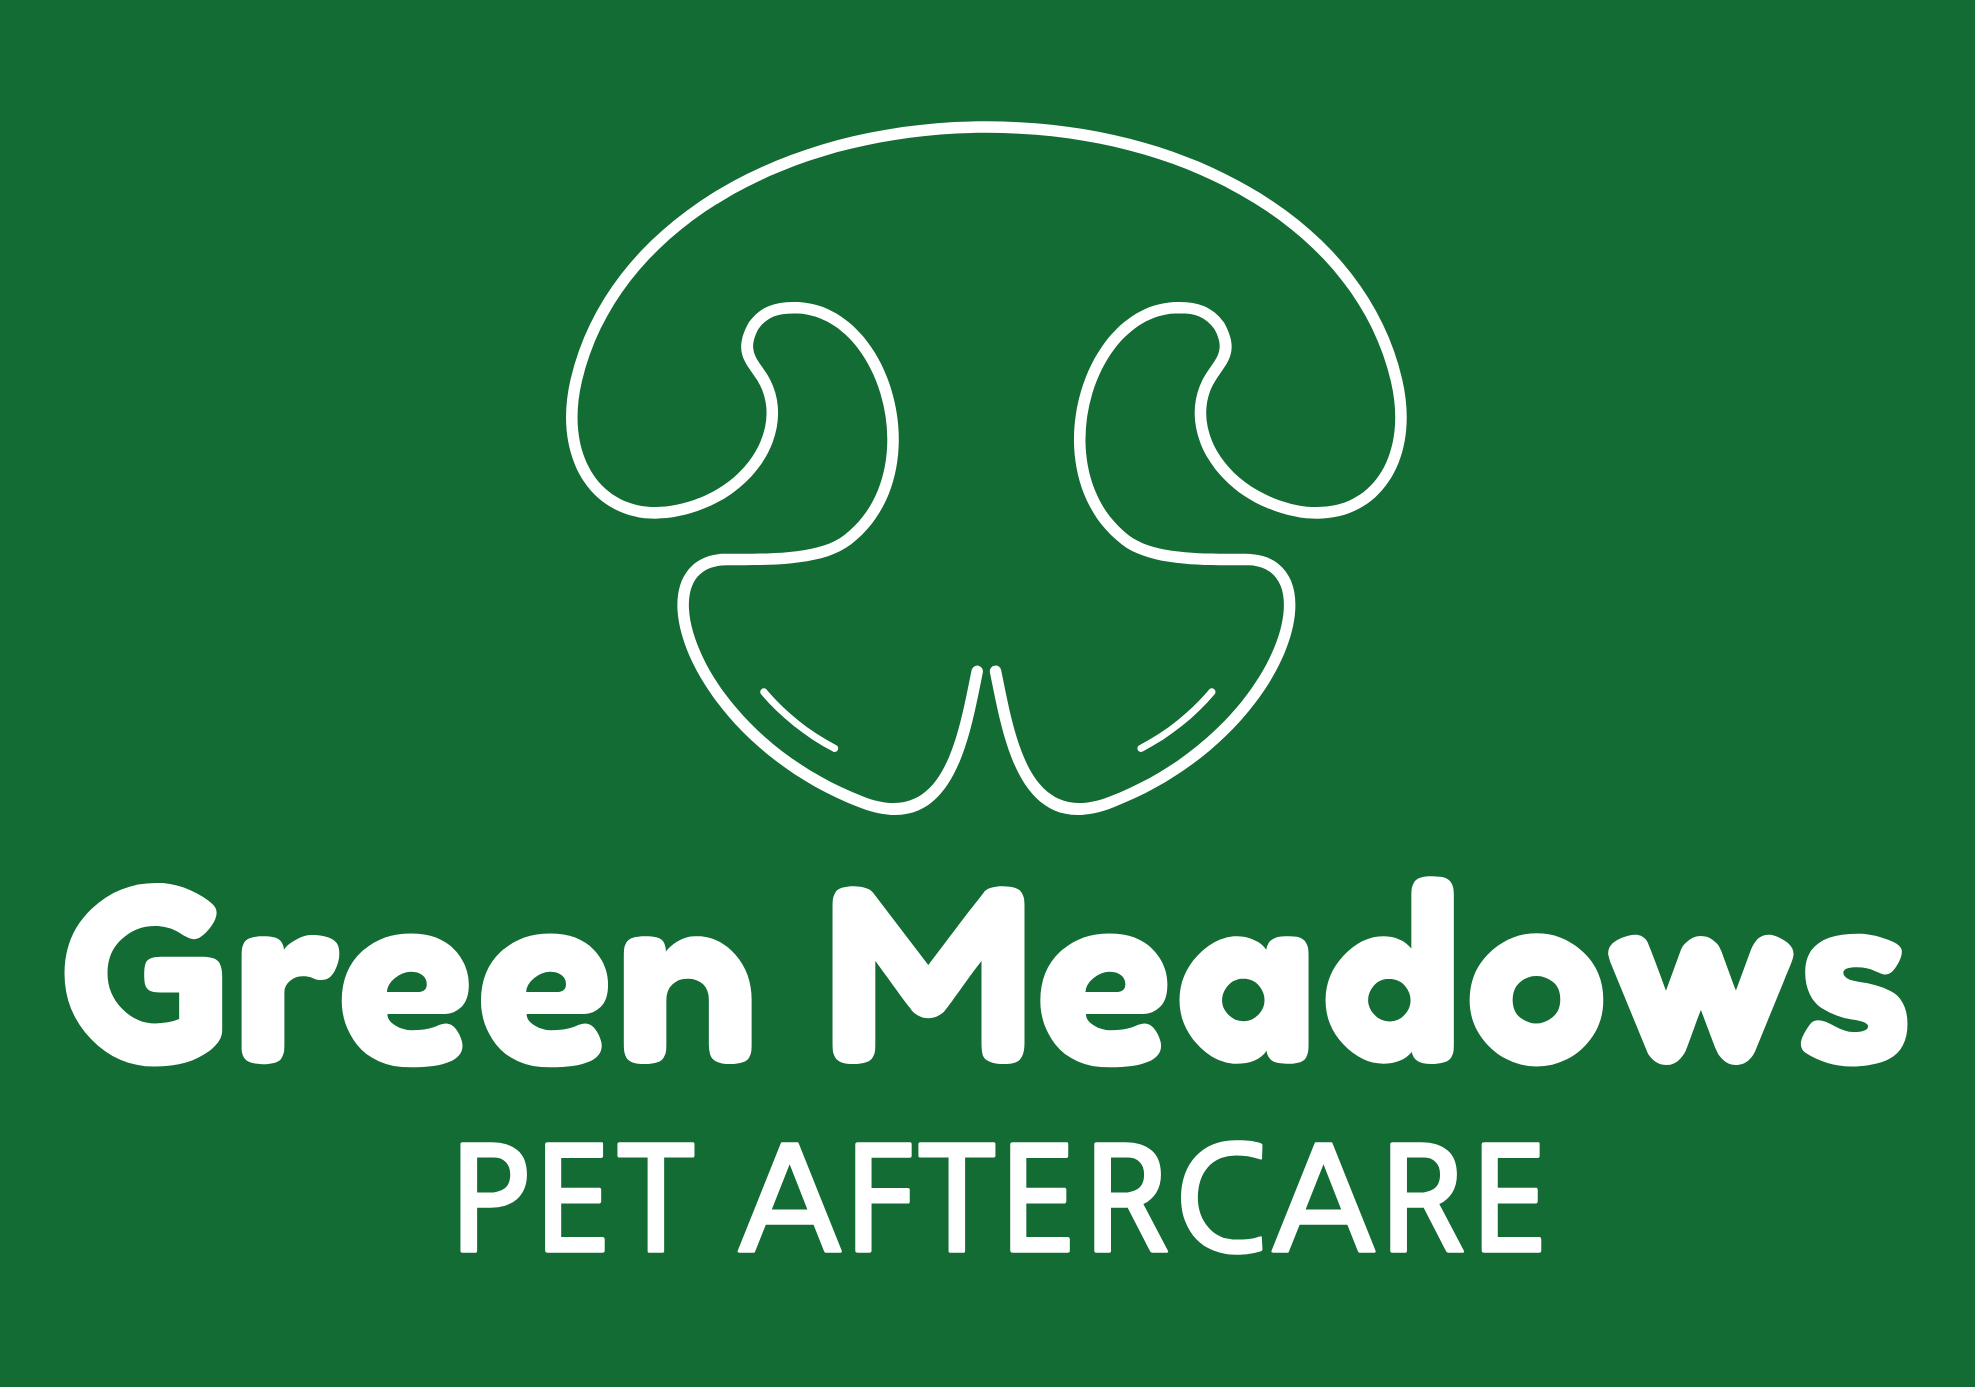 Cremation - Green Meadows Pet Aftercare Services